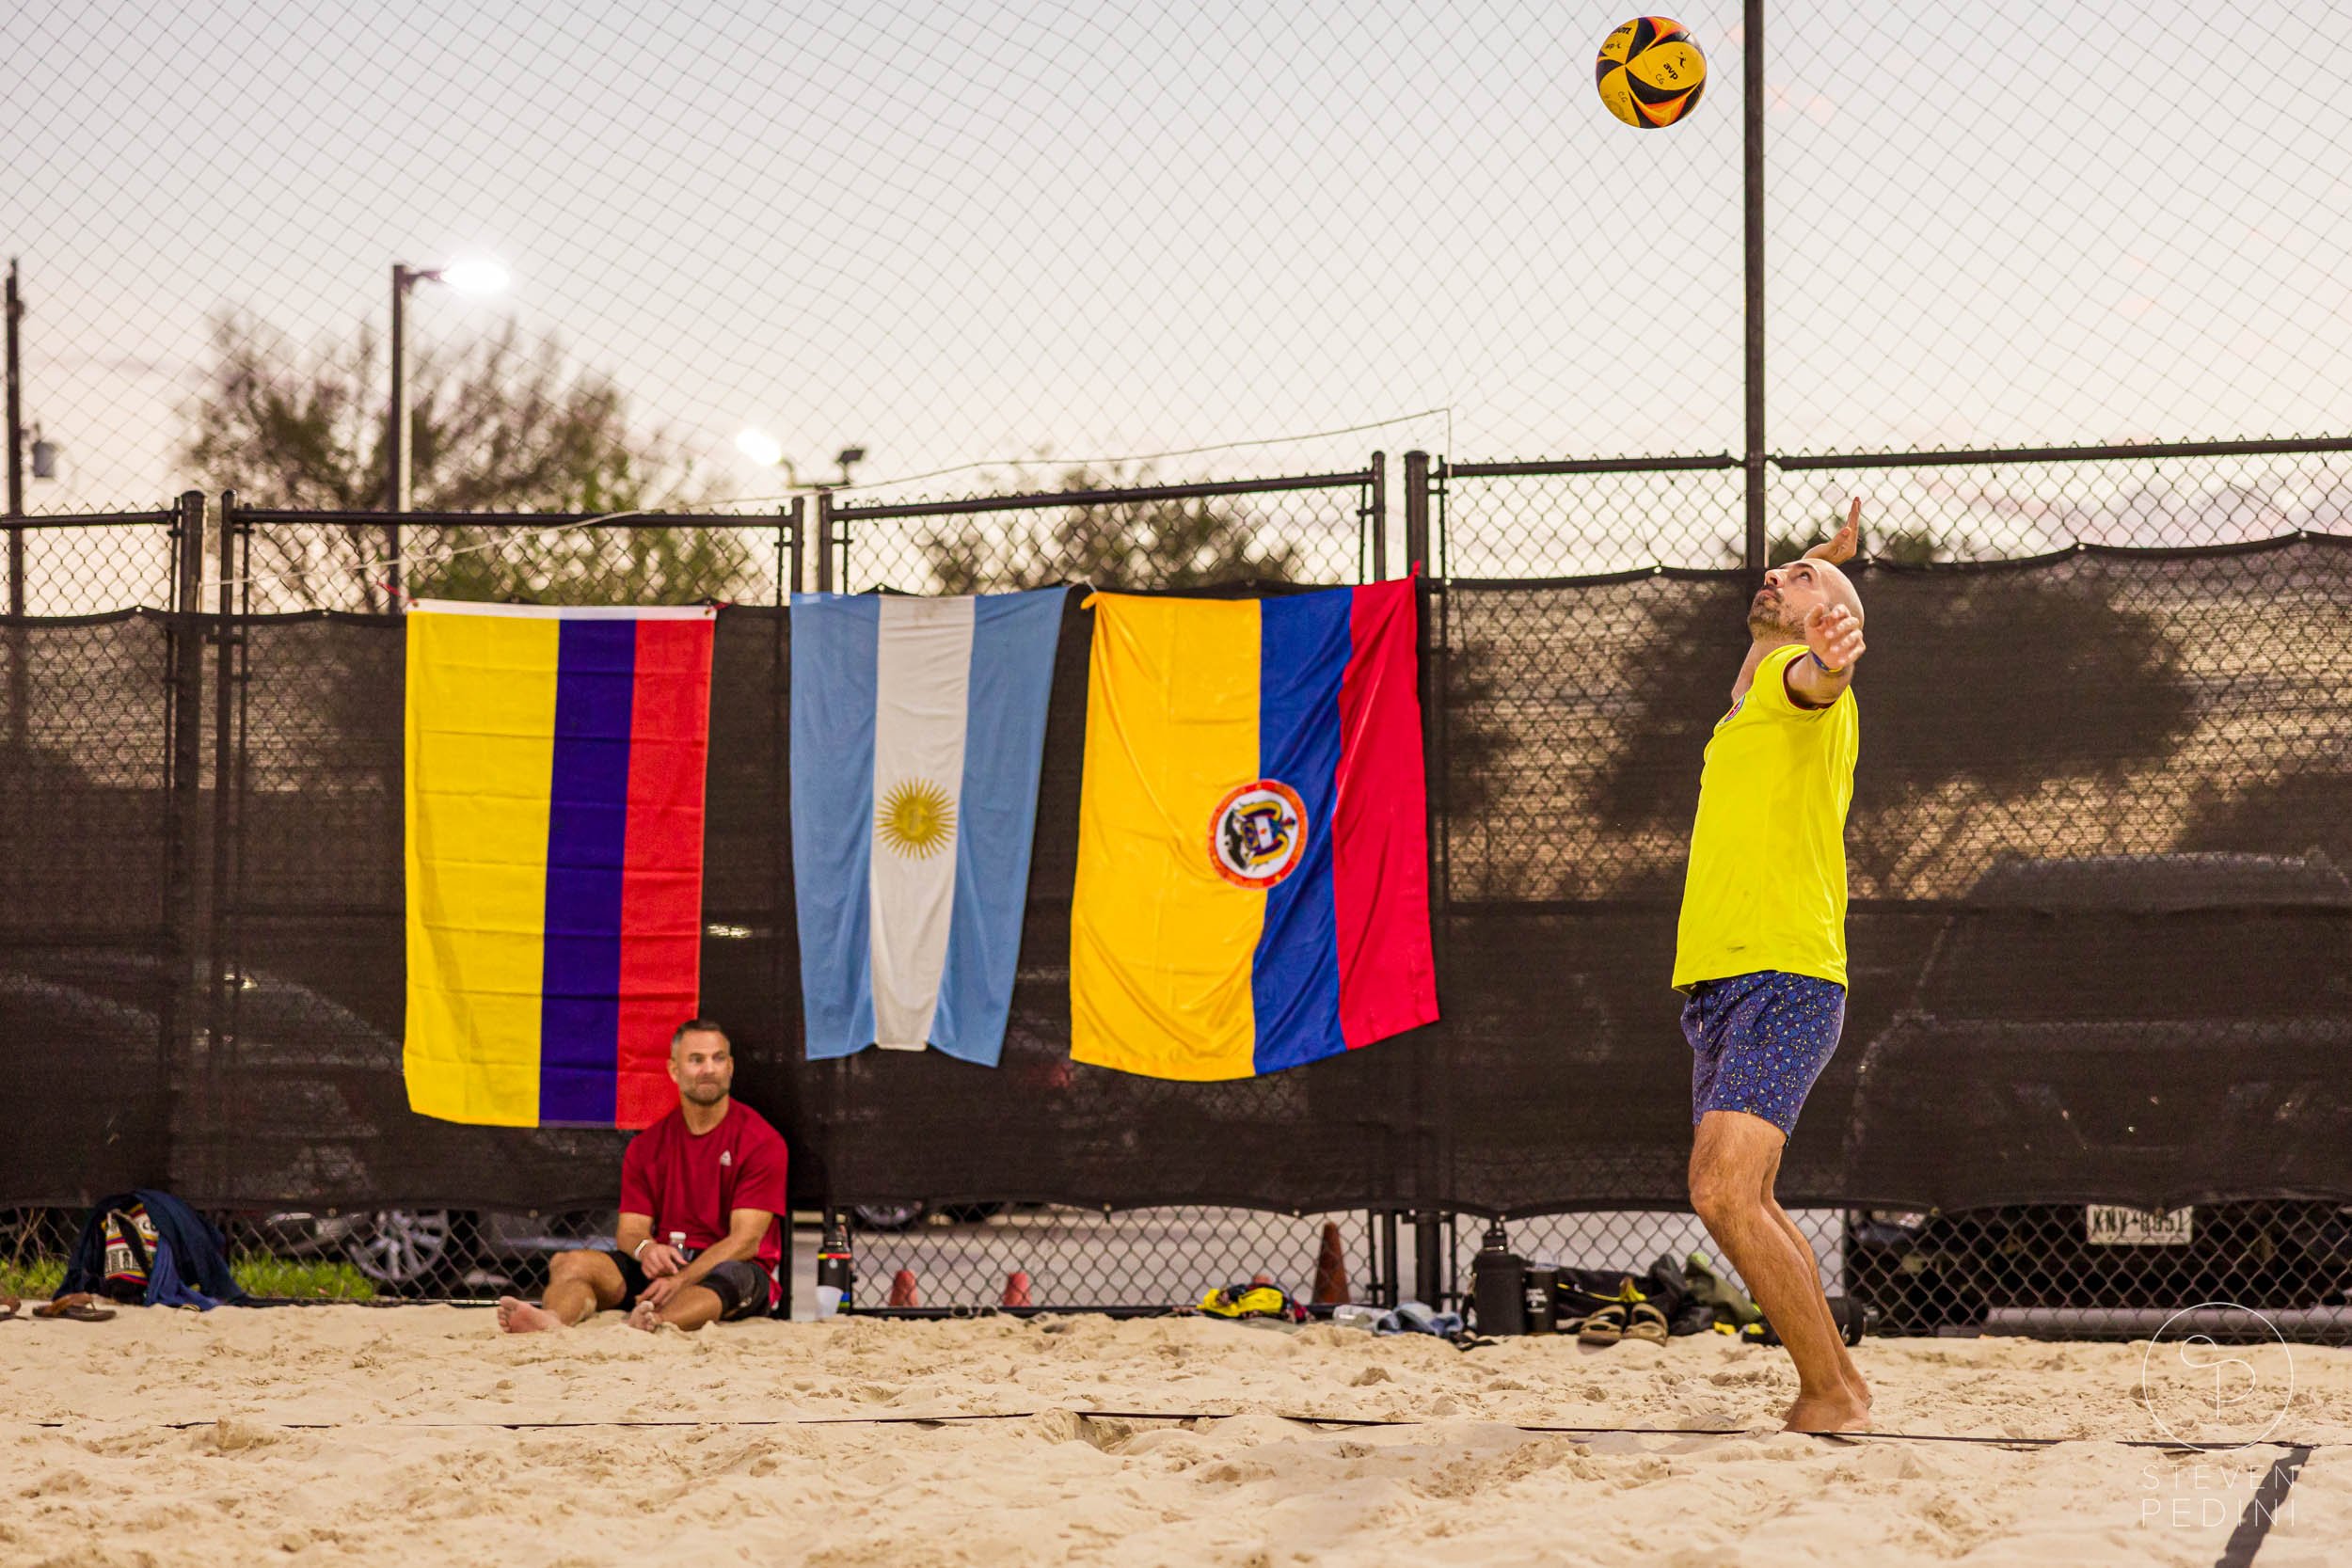 Steven Pedini Photography - Bumpy Pickle - Sand Volleyball - Houston TX - World Cup of Volleyball - 00263.jpg